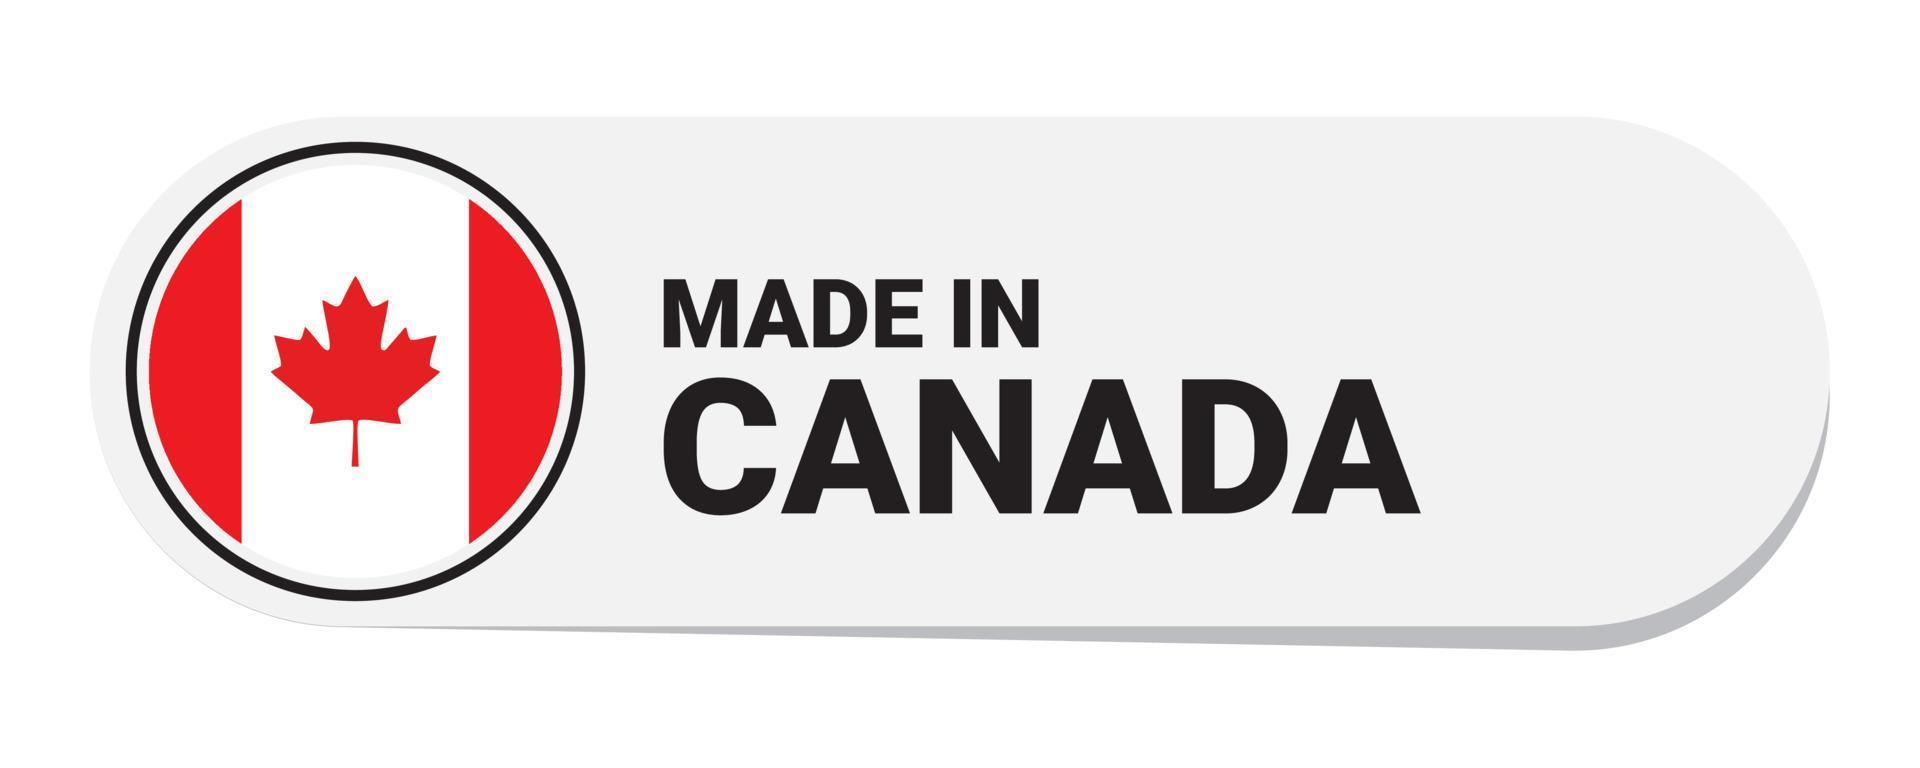 Icon made in canada, isolated on white background vector